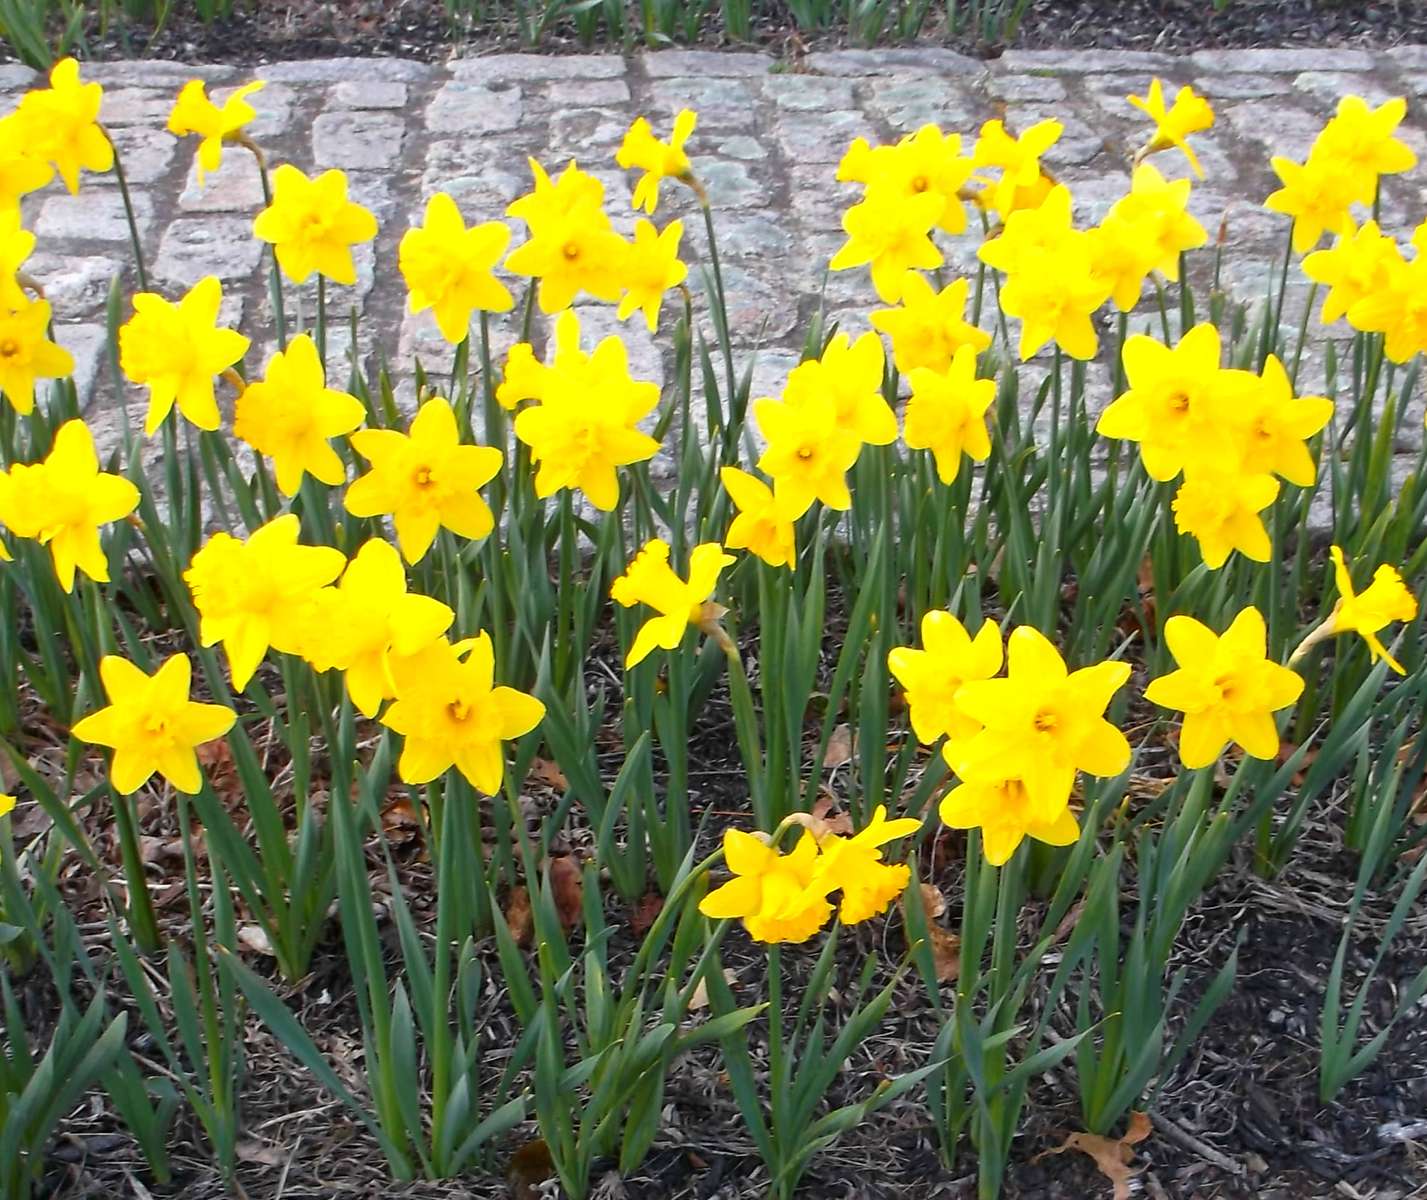 Daffodils puzzle online from photo